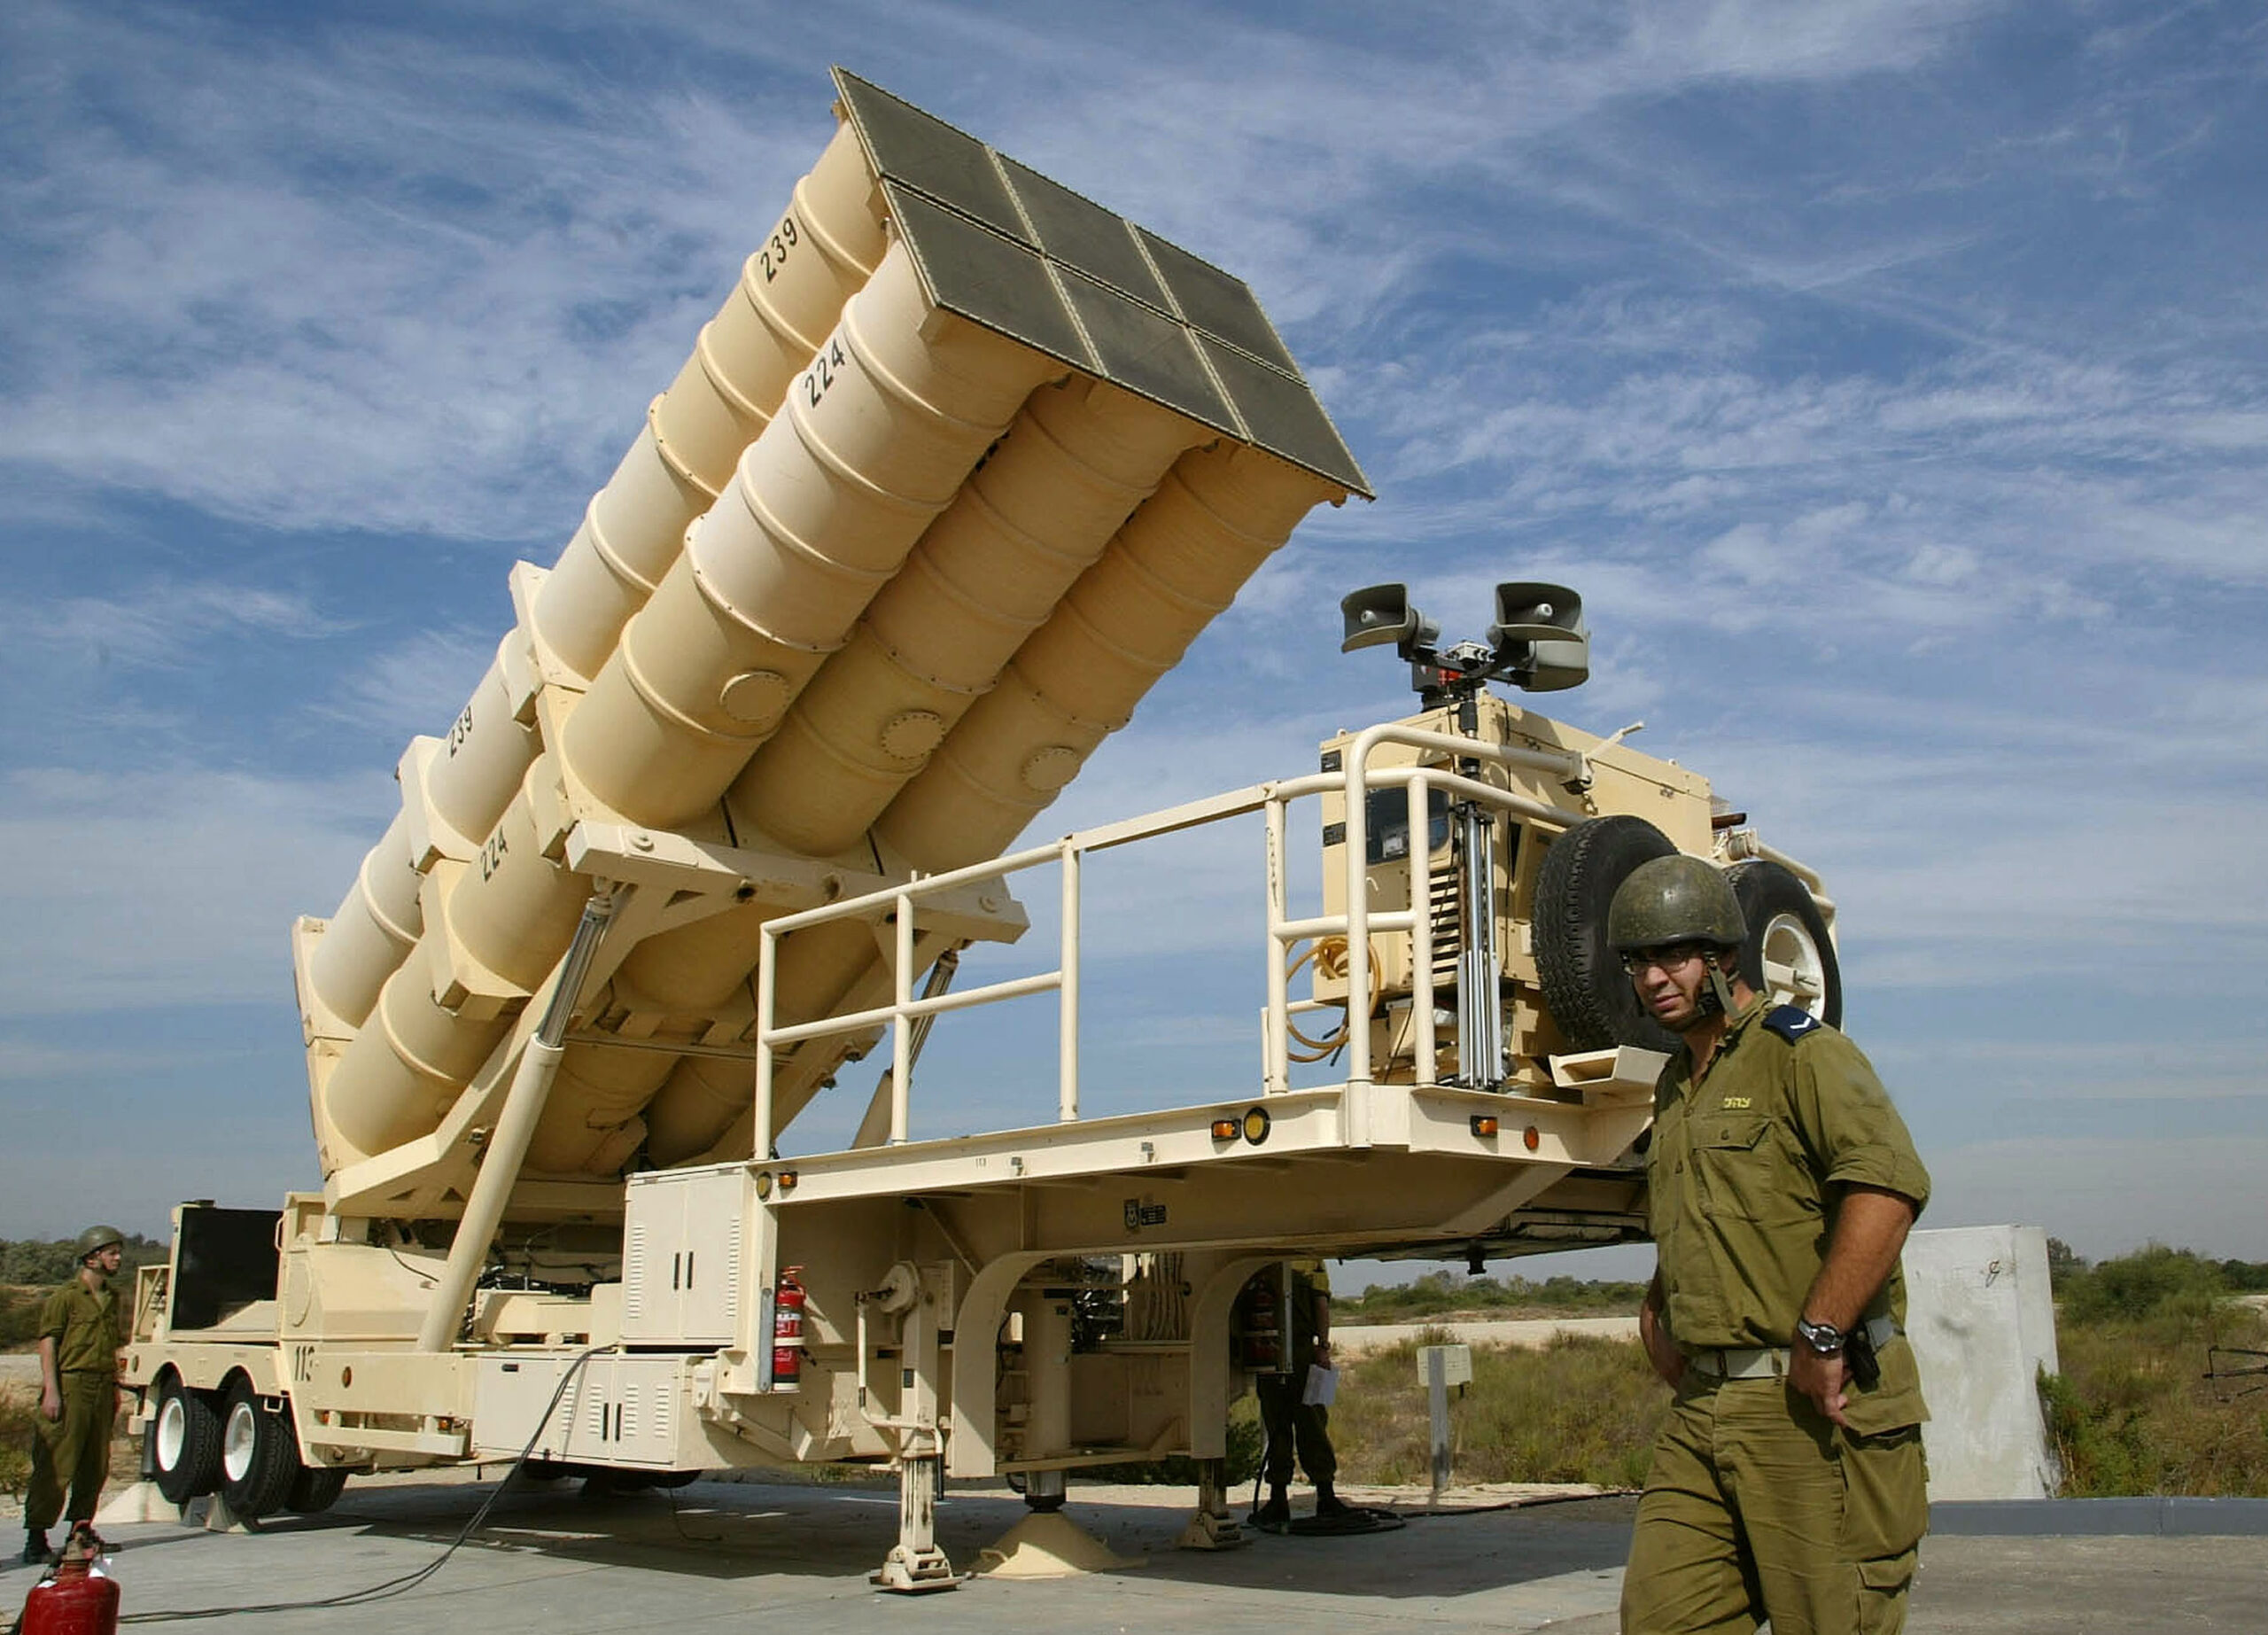 PALMAHIM, ISRAEL - NOVEMBER 7:  A battery of six Arrow missiles is raised into launch position at the Israeli Air Force's Palmahim base, as the anti-ballistic missile system is put on rare display to the news media, November 7, 2002 in Palmahim, Israel. Following the failure of the U.S.-built Patriot missiles to successfully intercept the 39 Iraqi scud missiles directed at it during the 1991 Gulf War, Israel developed the $2.2 billion Arrow system, which has been tested to detect, track and destroy a missile in under three minutes at altitudes of more than 30 miles, 50 kilometers.  (Photo by Getty Images)